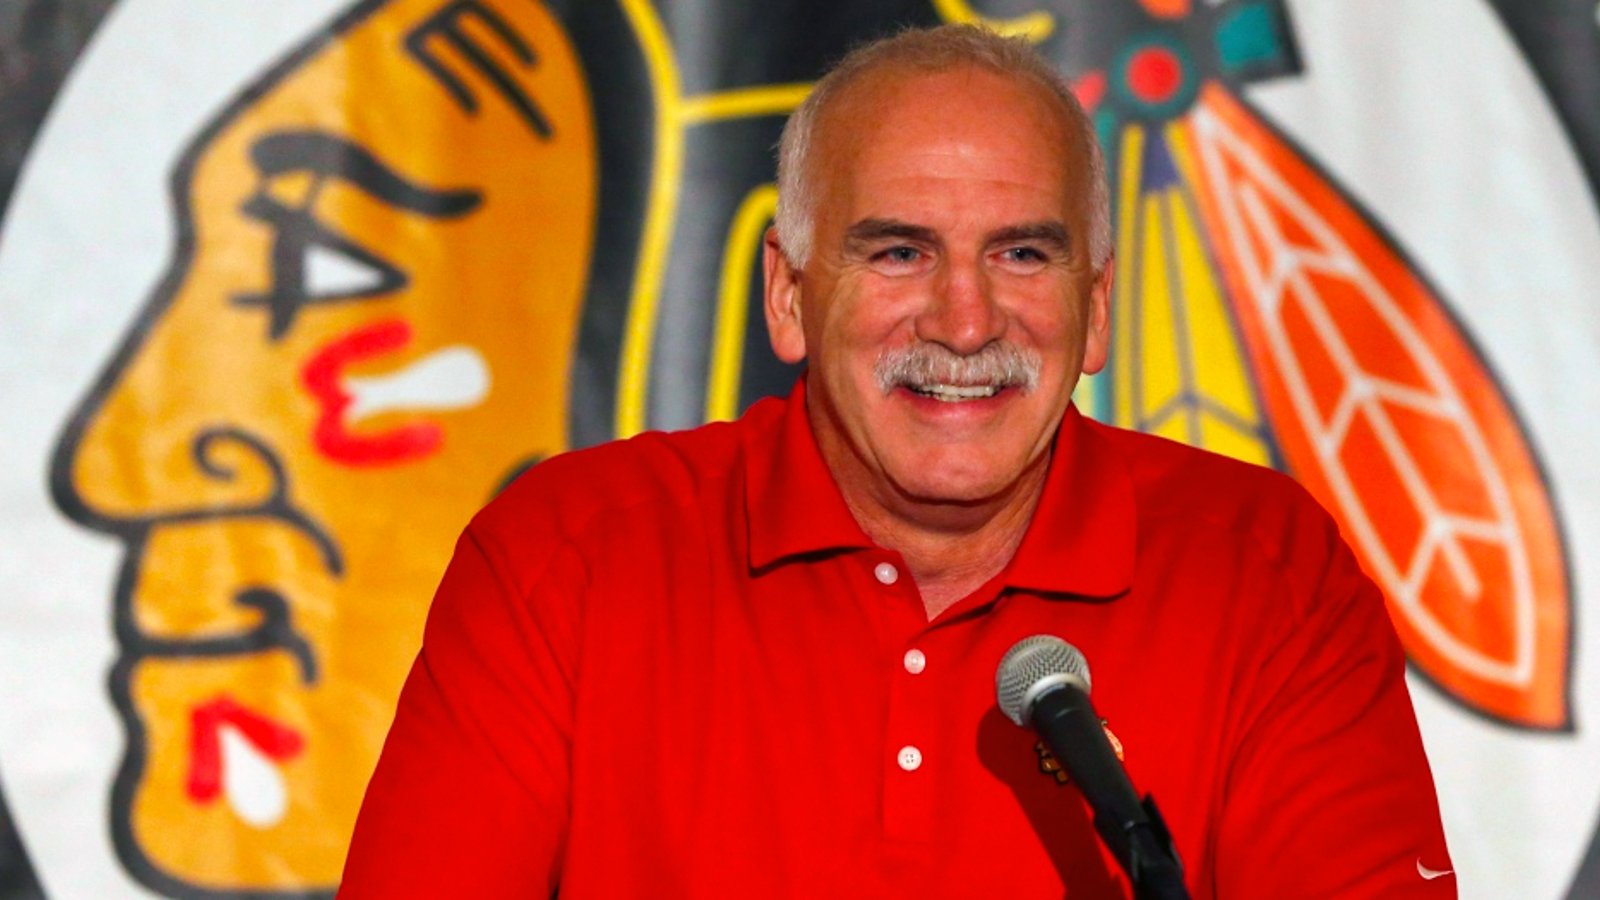 Joel Quenneville puts his foot in his mouth when questioned over Blackhawks abuse scandal